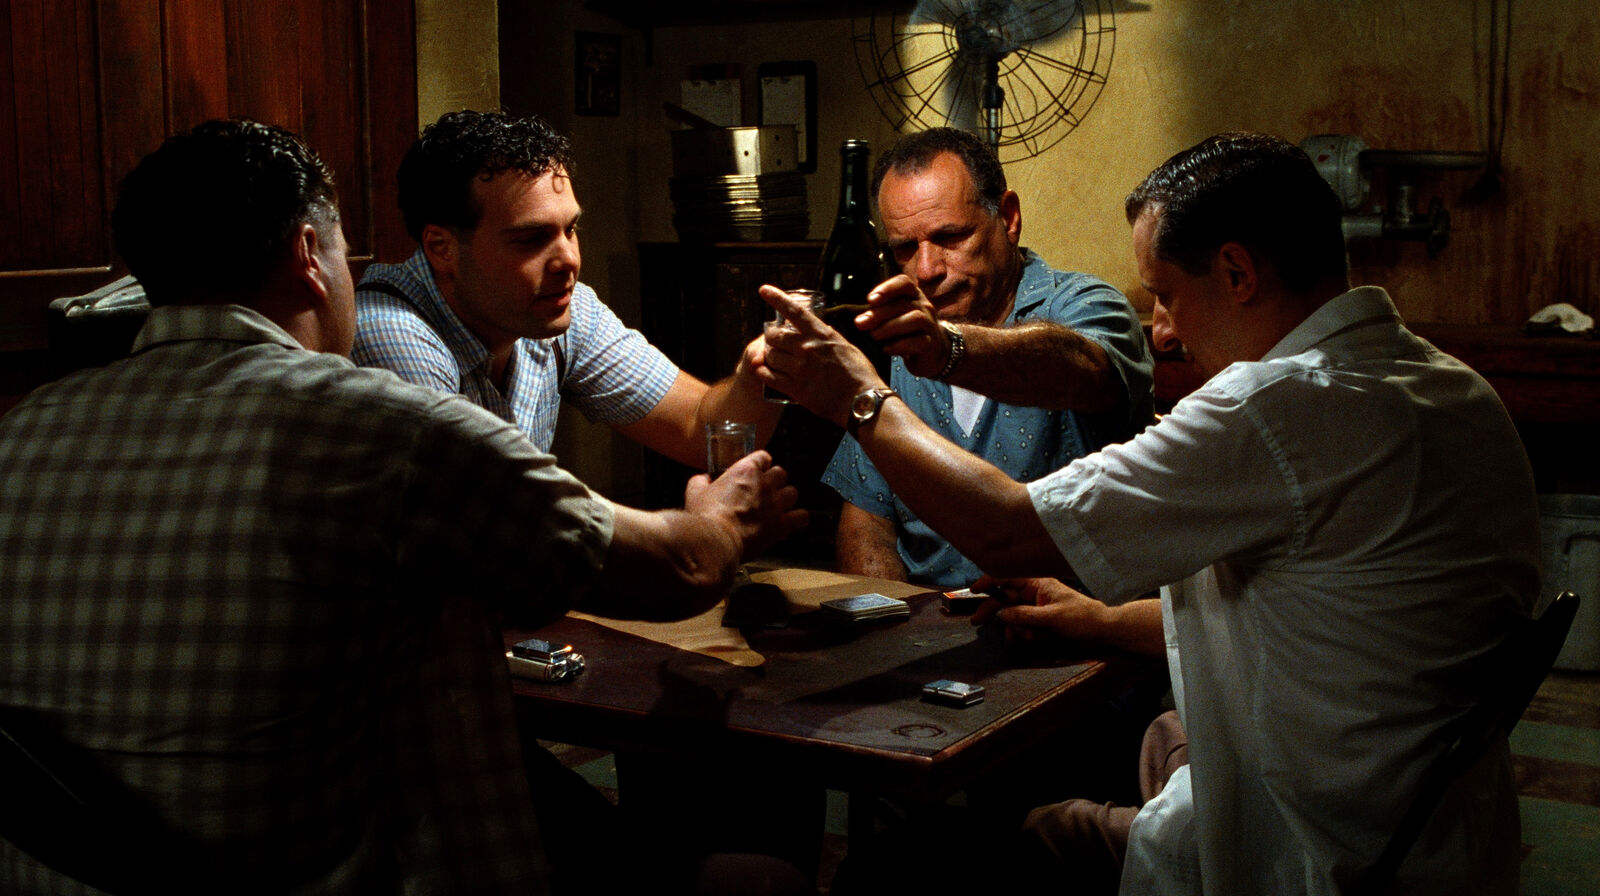 Left to right: Michael Rispoli (as Nicky Falconetti), Vincent D'Onofrio (as Joseph Santangelo), Victor Argo (as Lino Falconetti), and Joe Grifasi (as Frank Manzone)  in Nancy Savoca's 1993 classic, HOUSEHOLD SAINTS, based on a novel by Francine Prose, script by Richard Guay and Nancy Savoca. HOUSEHOLD SAINTS has been digitally restored and remastered by Lightbox Film Center at University of the Arts (Philadelphia) in collaboration with Milestone Films with support from Ron and Suzanne Naples. Thank you to Nancy Savoca and Rich Guay, Ira Deutchman, Maggie Renzi, the UCLA Film & Television Archive, and Phil Hallman, University of Michigan Screen Arts Mavericks & Makers Collections. Restoration Supervisor: Ross Lipman, Corpus Fluxus. Picture Restoration: Illuminate Hollywood. Sound Restoration: Audio Mechanics.